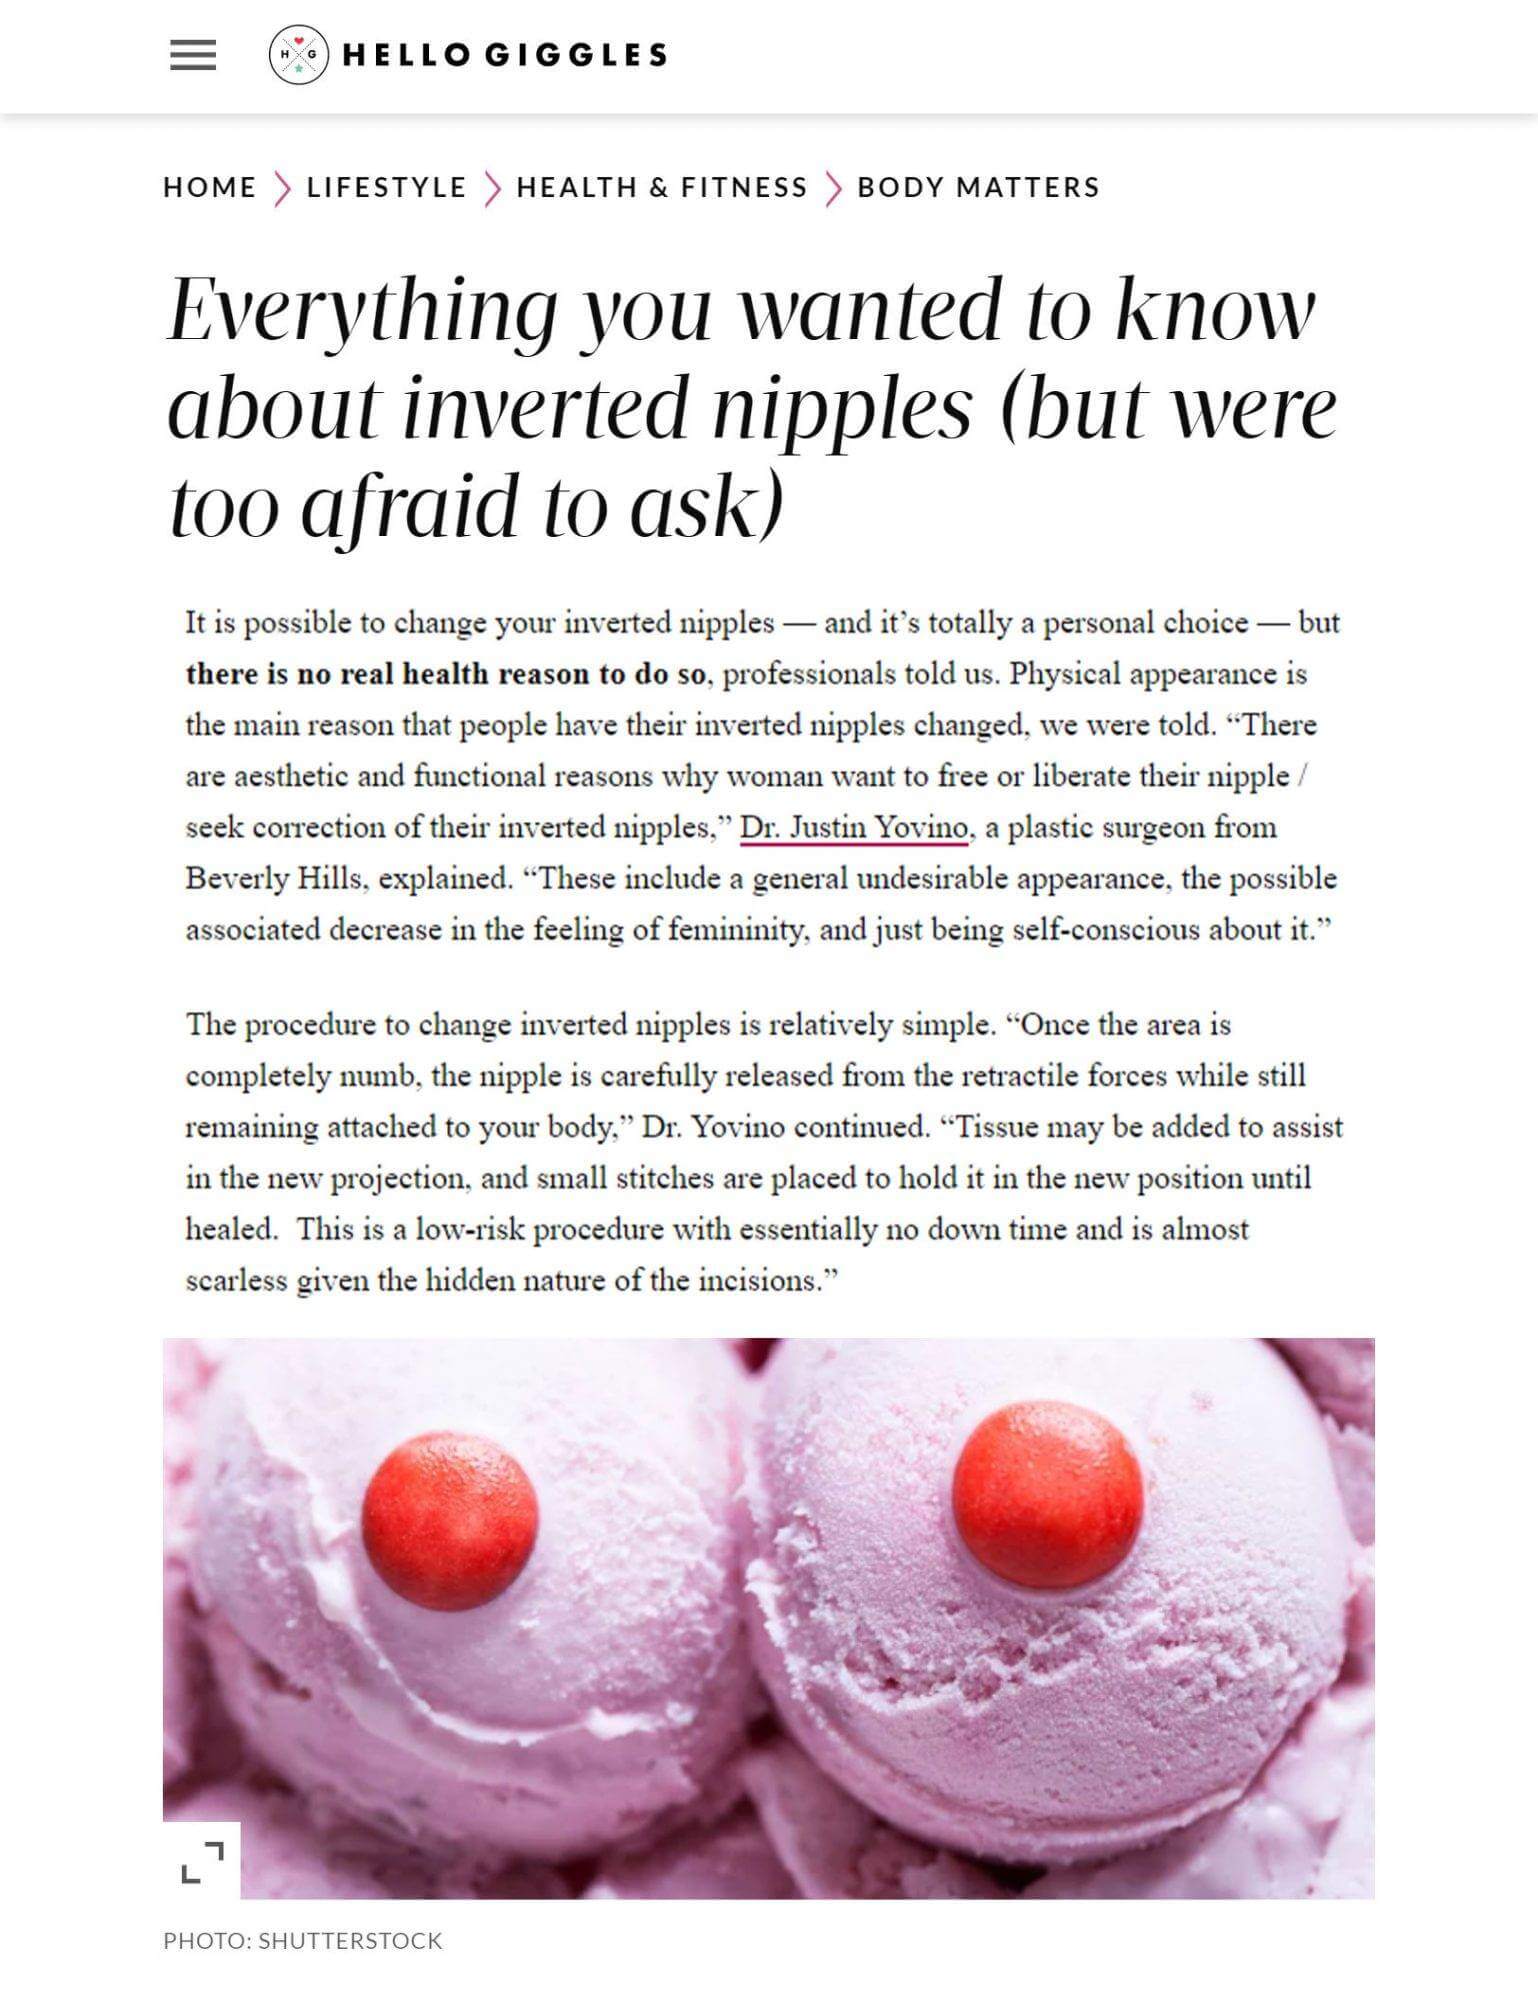 An image from an article from Hello Giggles titled "Everything you wanted to know about inverted nipples (but were too afraid to ask)". The screenshot features an image of two scoops of pink ice cream, each with a red candy centrally placed to resemble breasts.